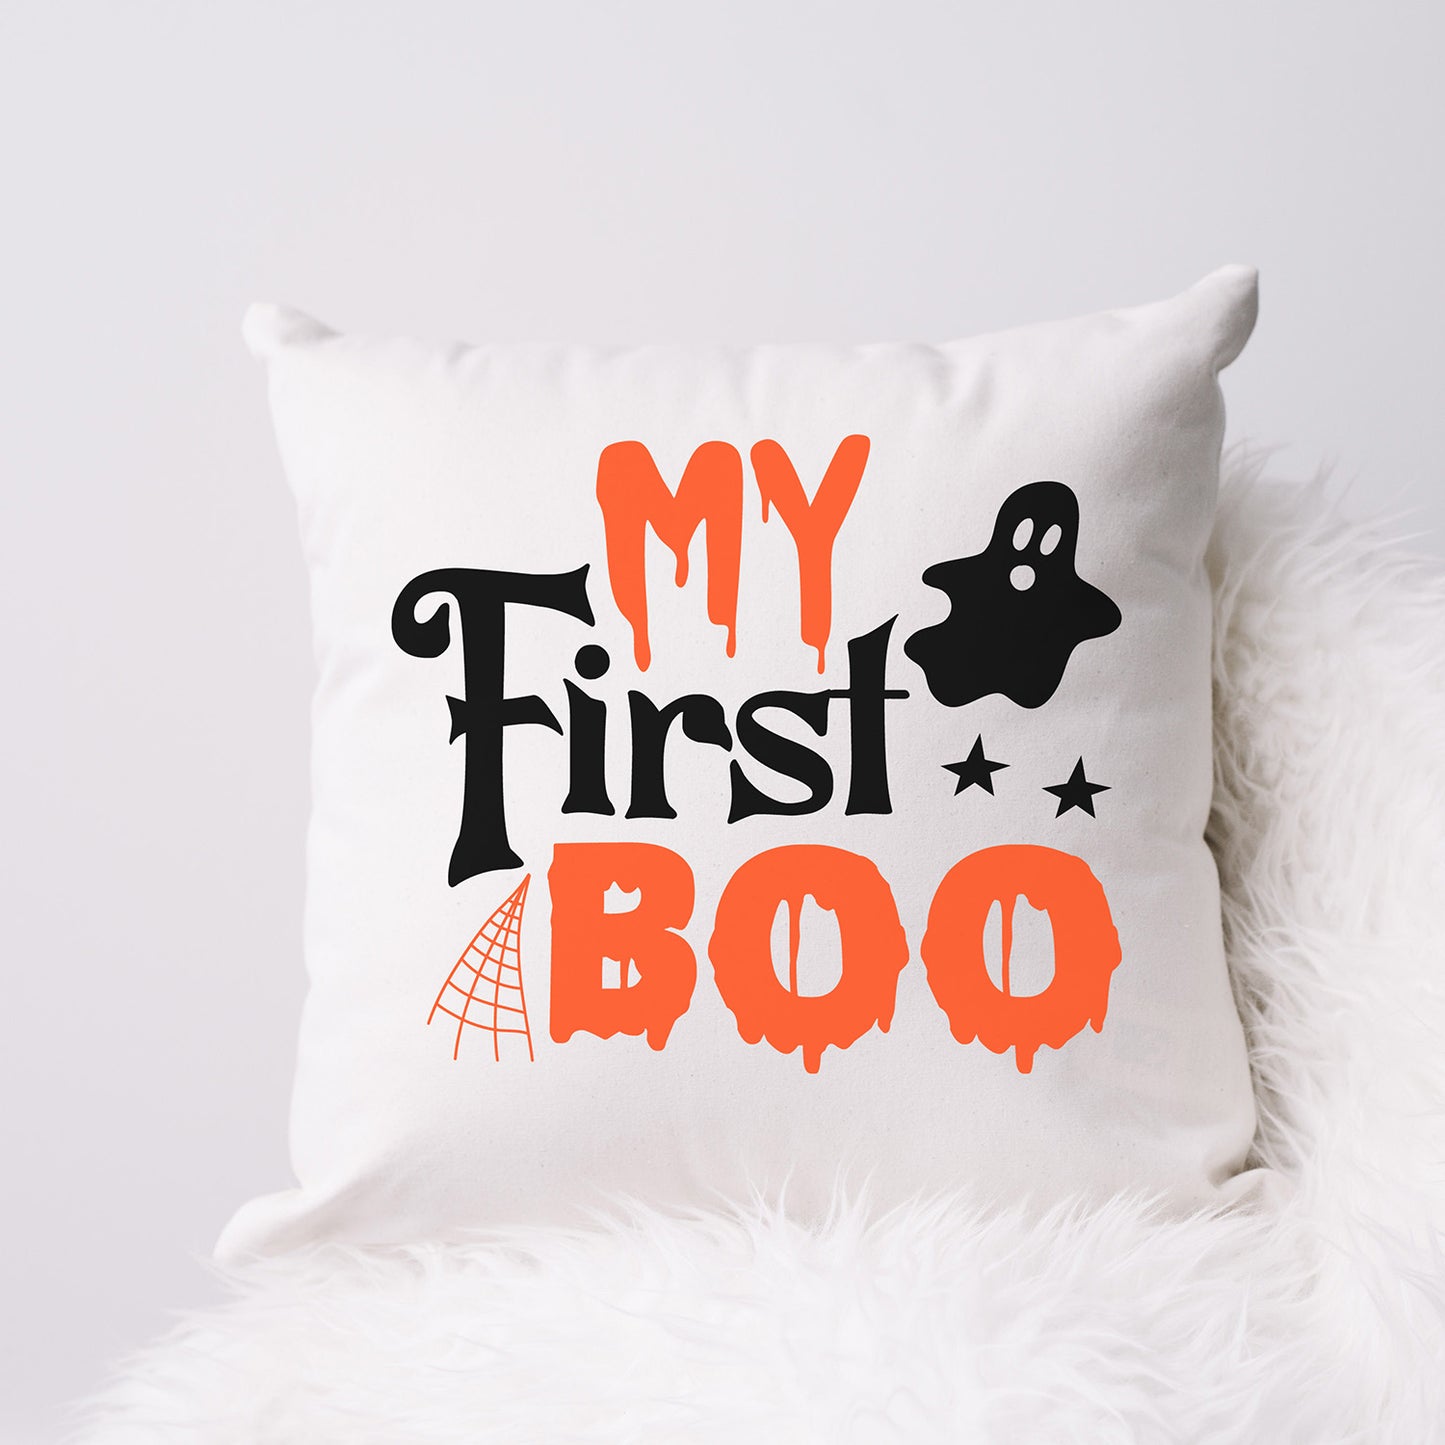 "My First Boo" Graphic